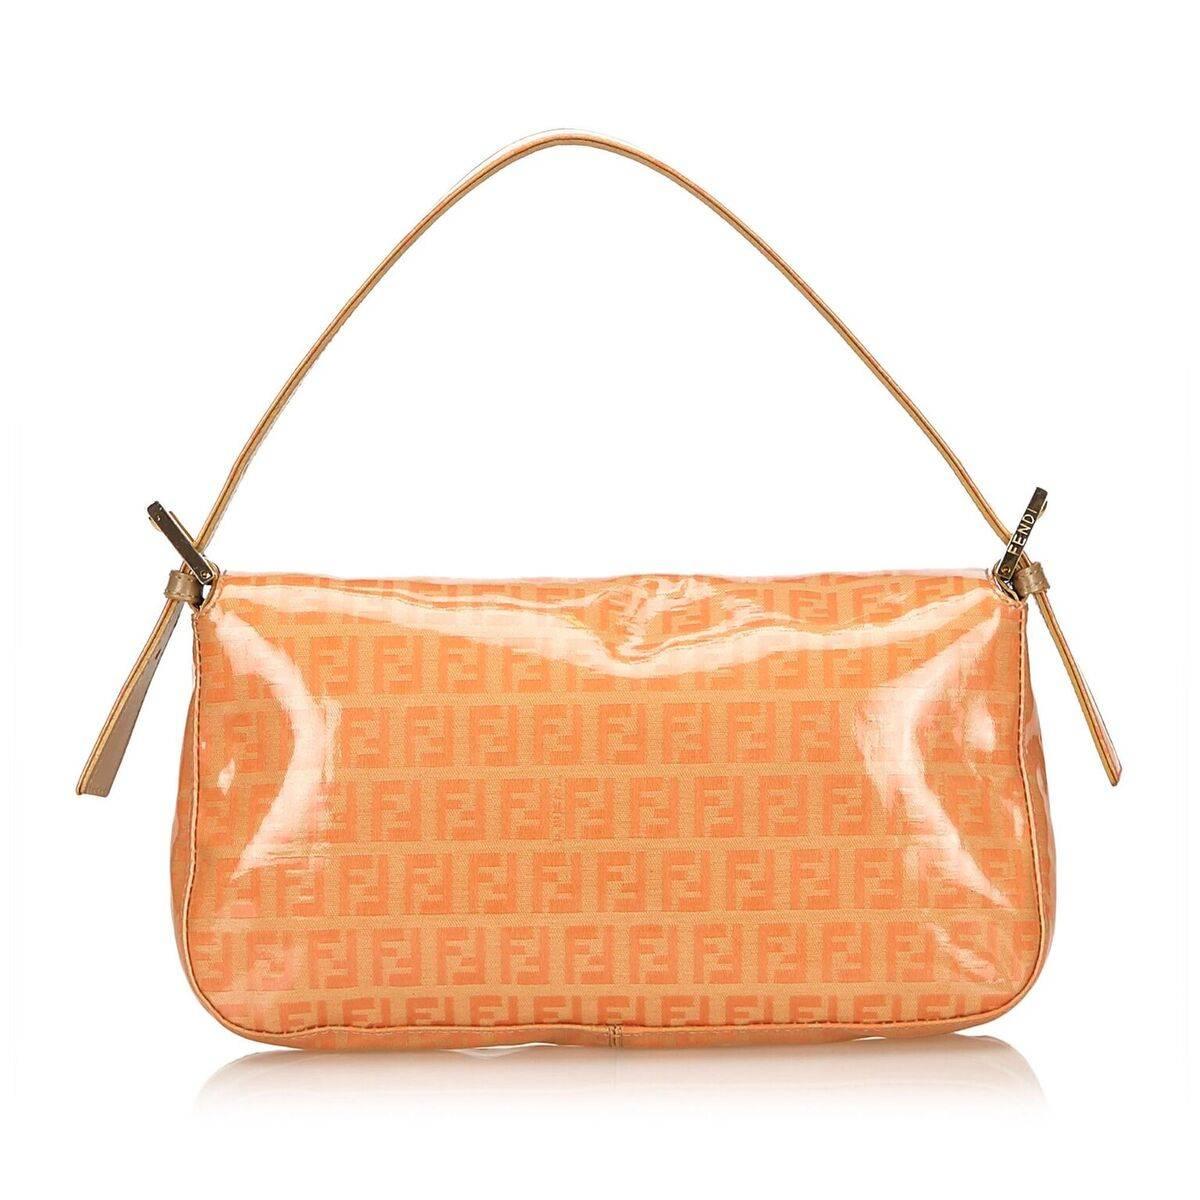 Product details:  Orange coated canvas Zucchino Mama baguette bag by Fendi.  Single shoulder strap.  Front flap with magnetic snap closure.  Lined interior with inner zip pocket.  Silvertone hardware.  Dust bag included.  10 6 2 
Condition: